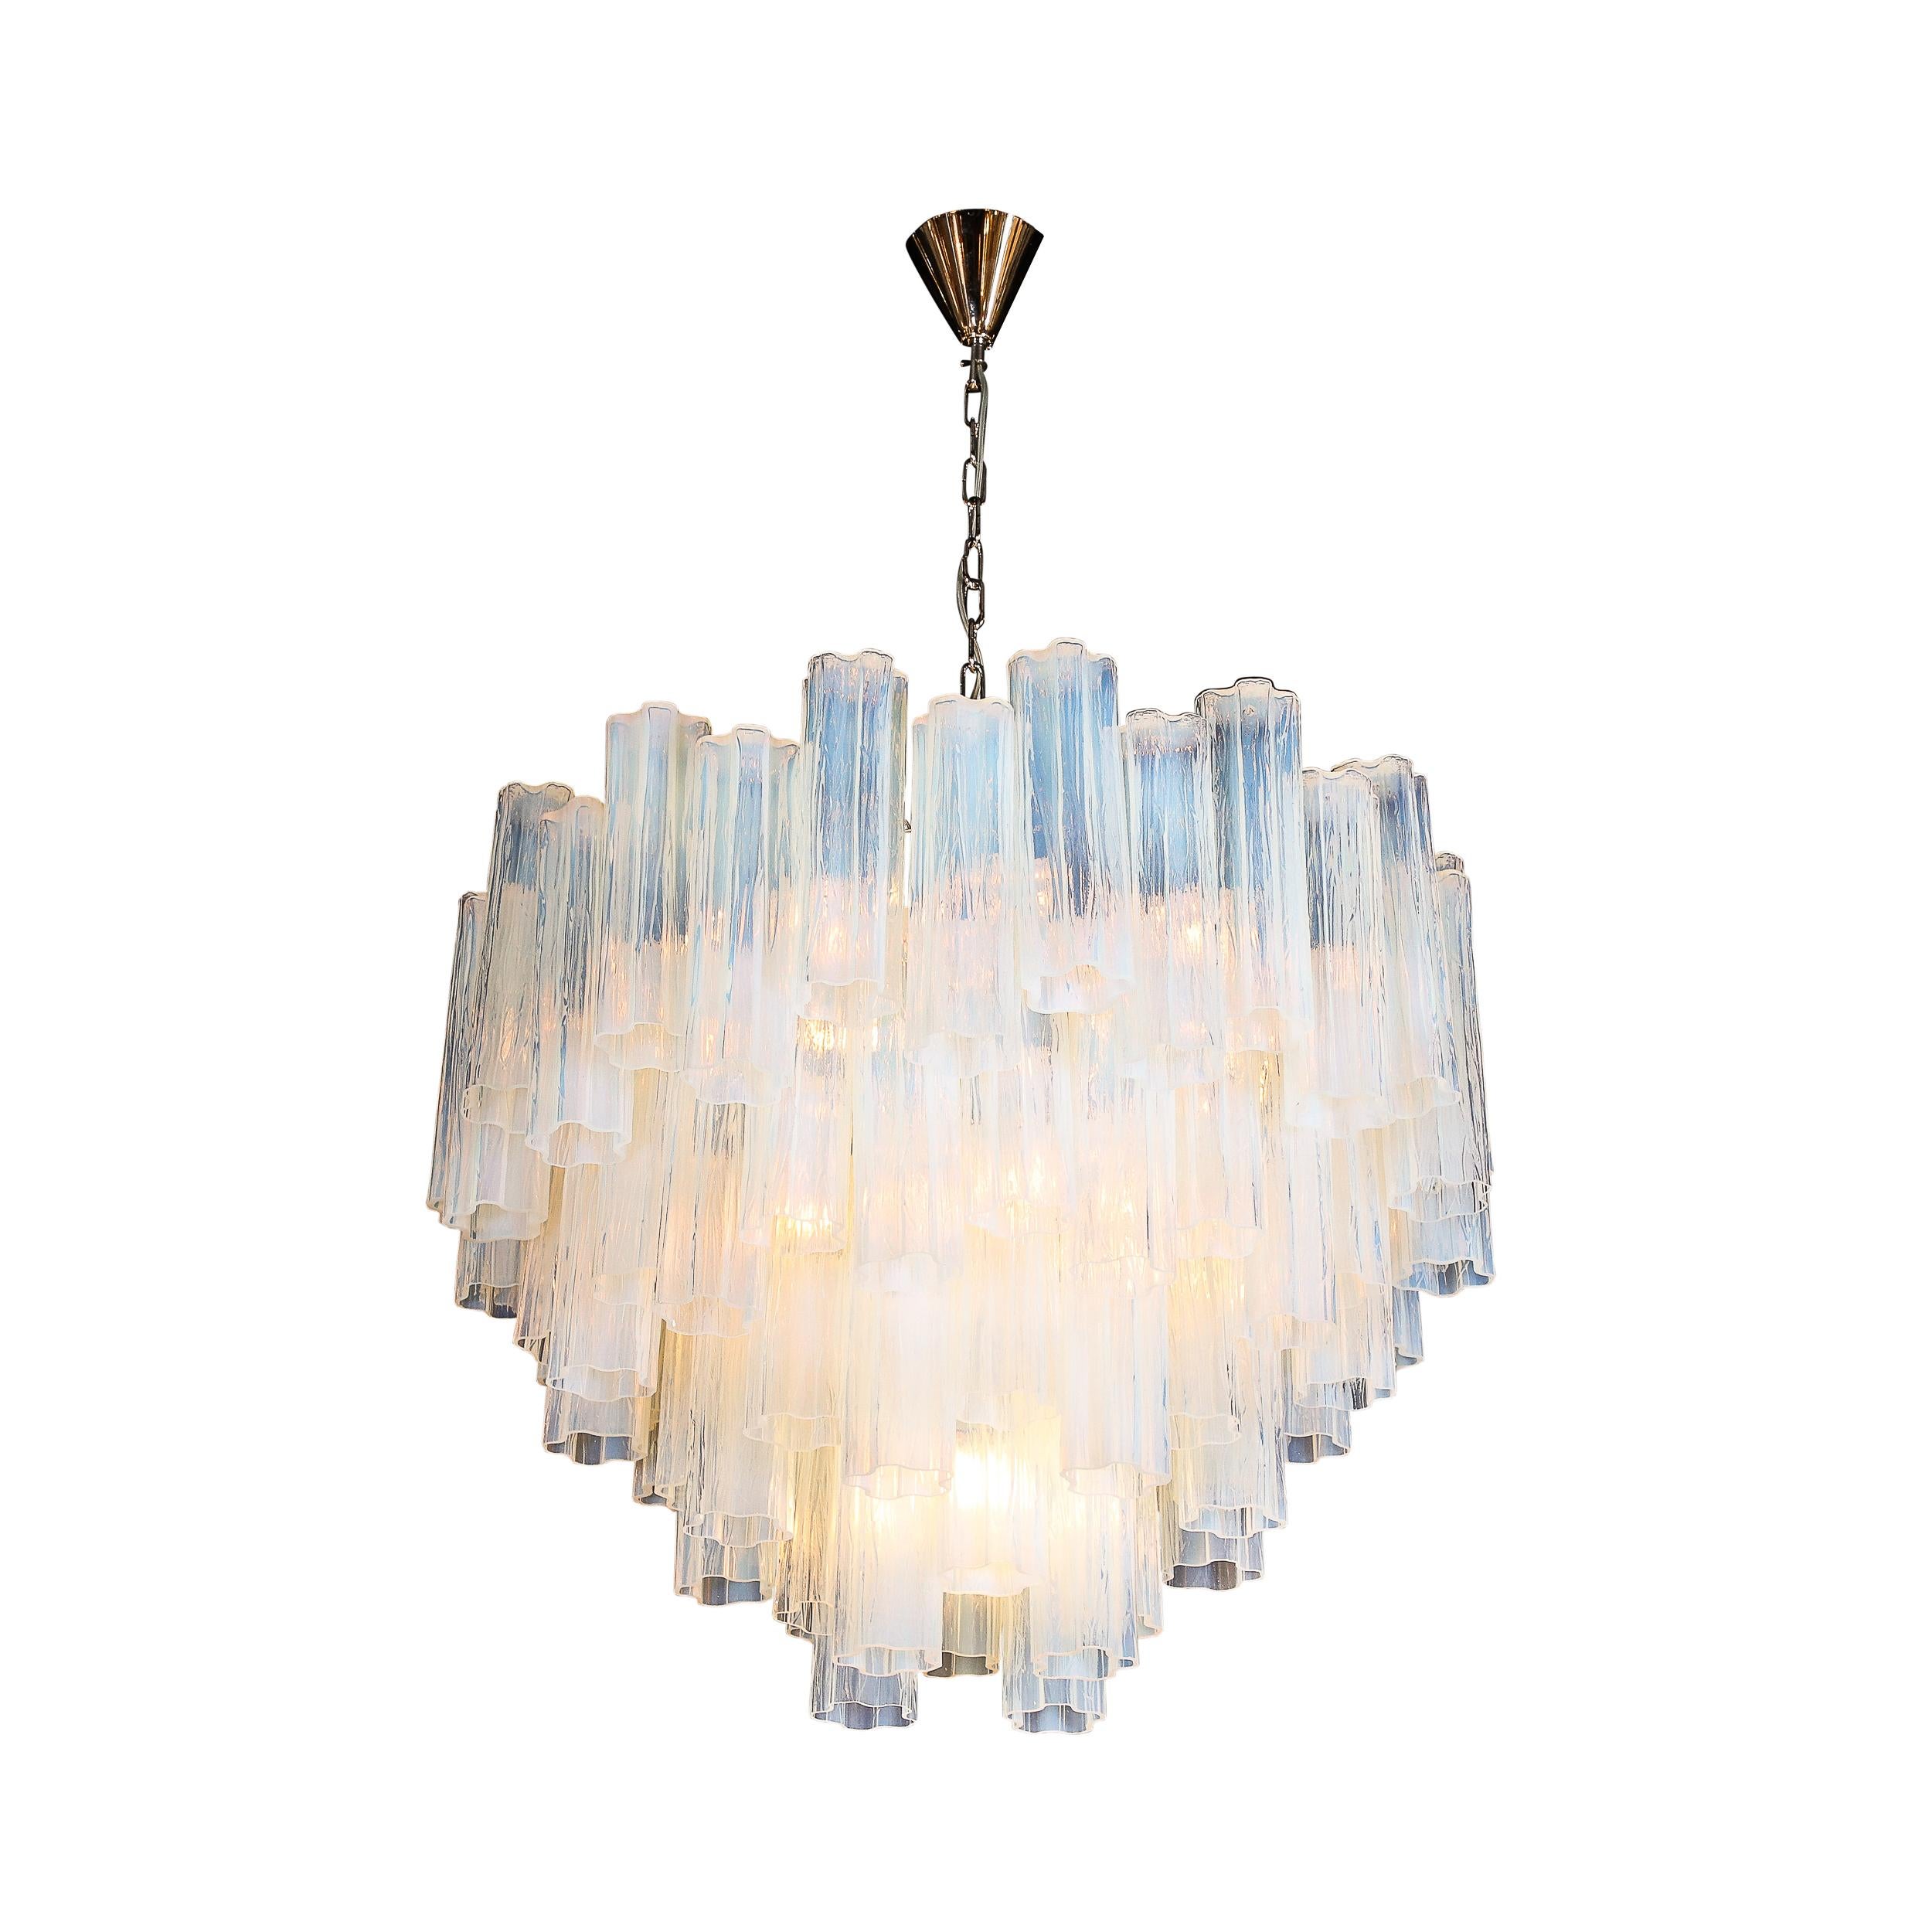 This glamourous and inviting Modernist Four-Tier Opalescent Tronchi Chandelier originates from Murano Italy 21st Century. Featuring four tiers of stunning Tronchi glass featuring Faux Bois texturing in a gleaming semi-translucent opalescent hue,